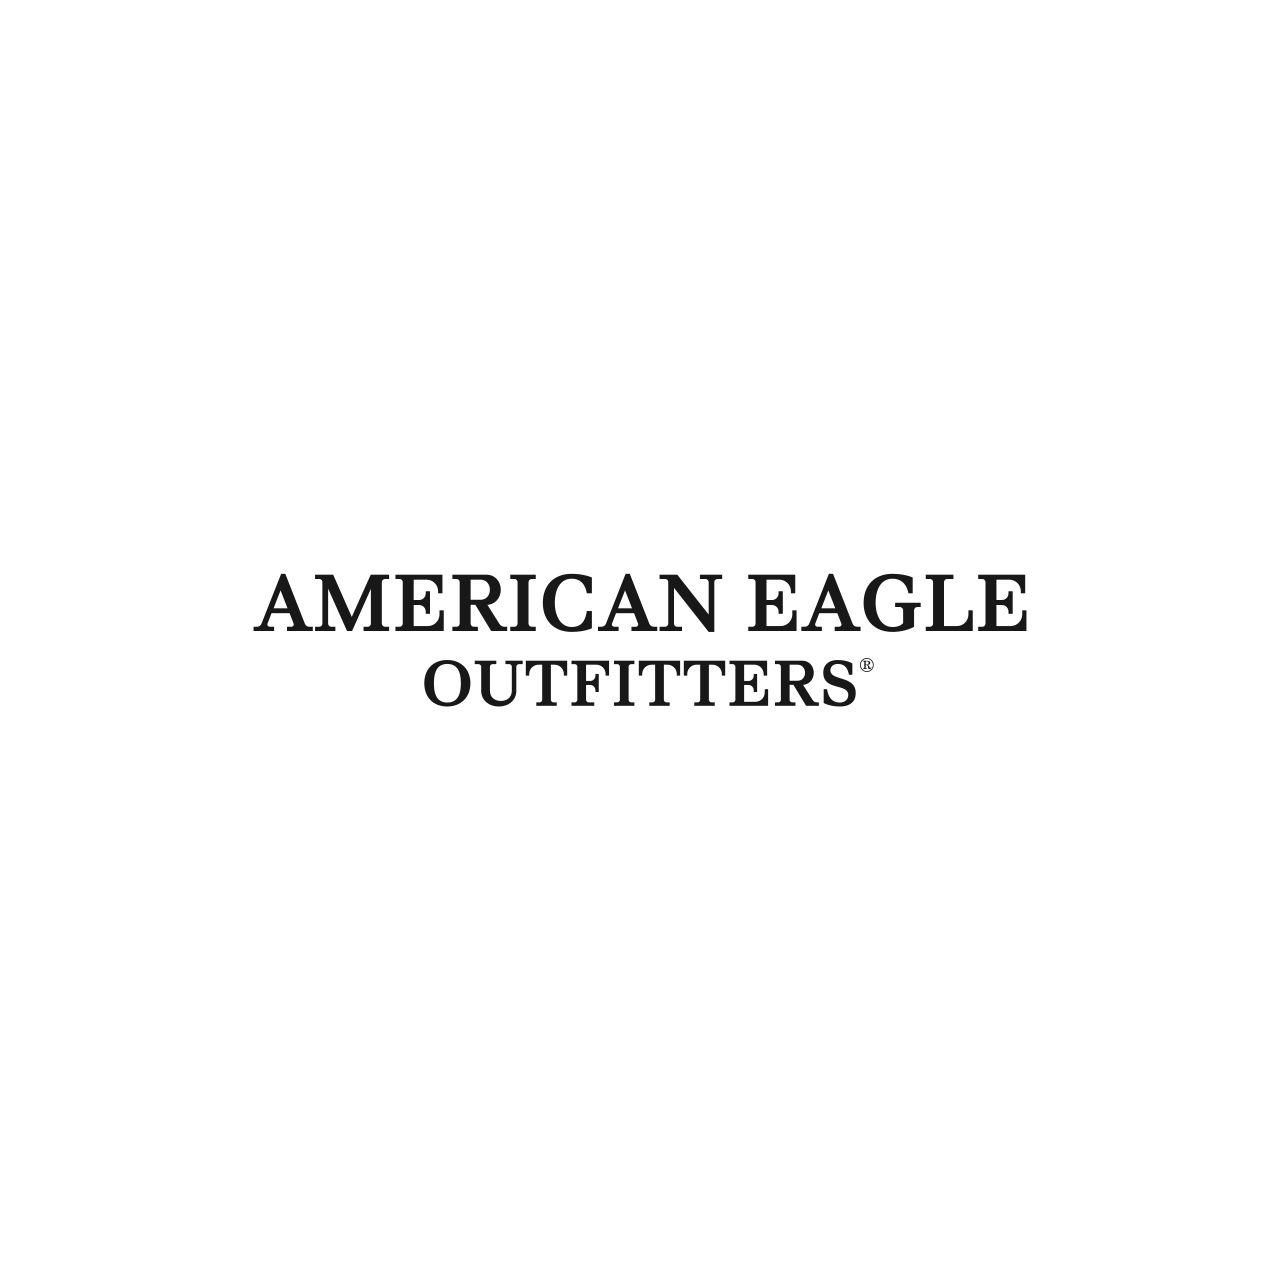 American Eagle Outfitters Logo - American Eagle Outfitters. The Outlet Collection